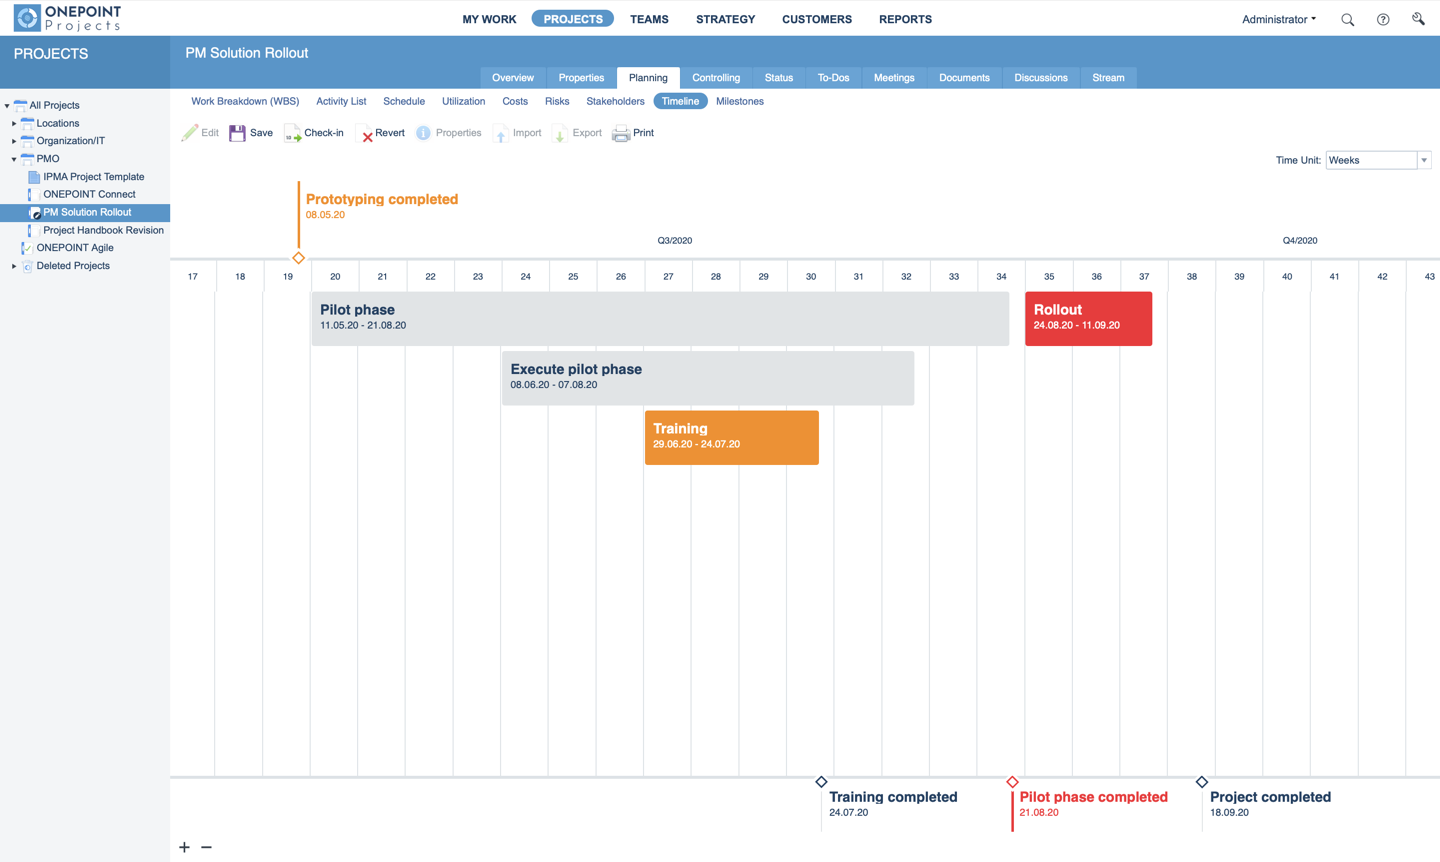 timeline-view (Image: ONEPOINT Projects)